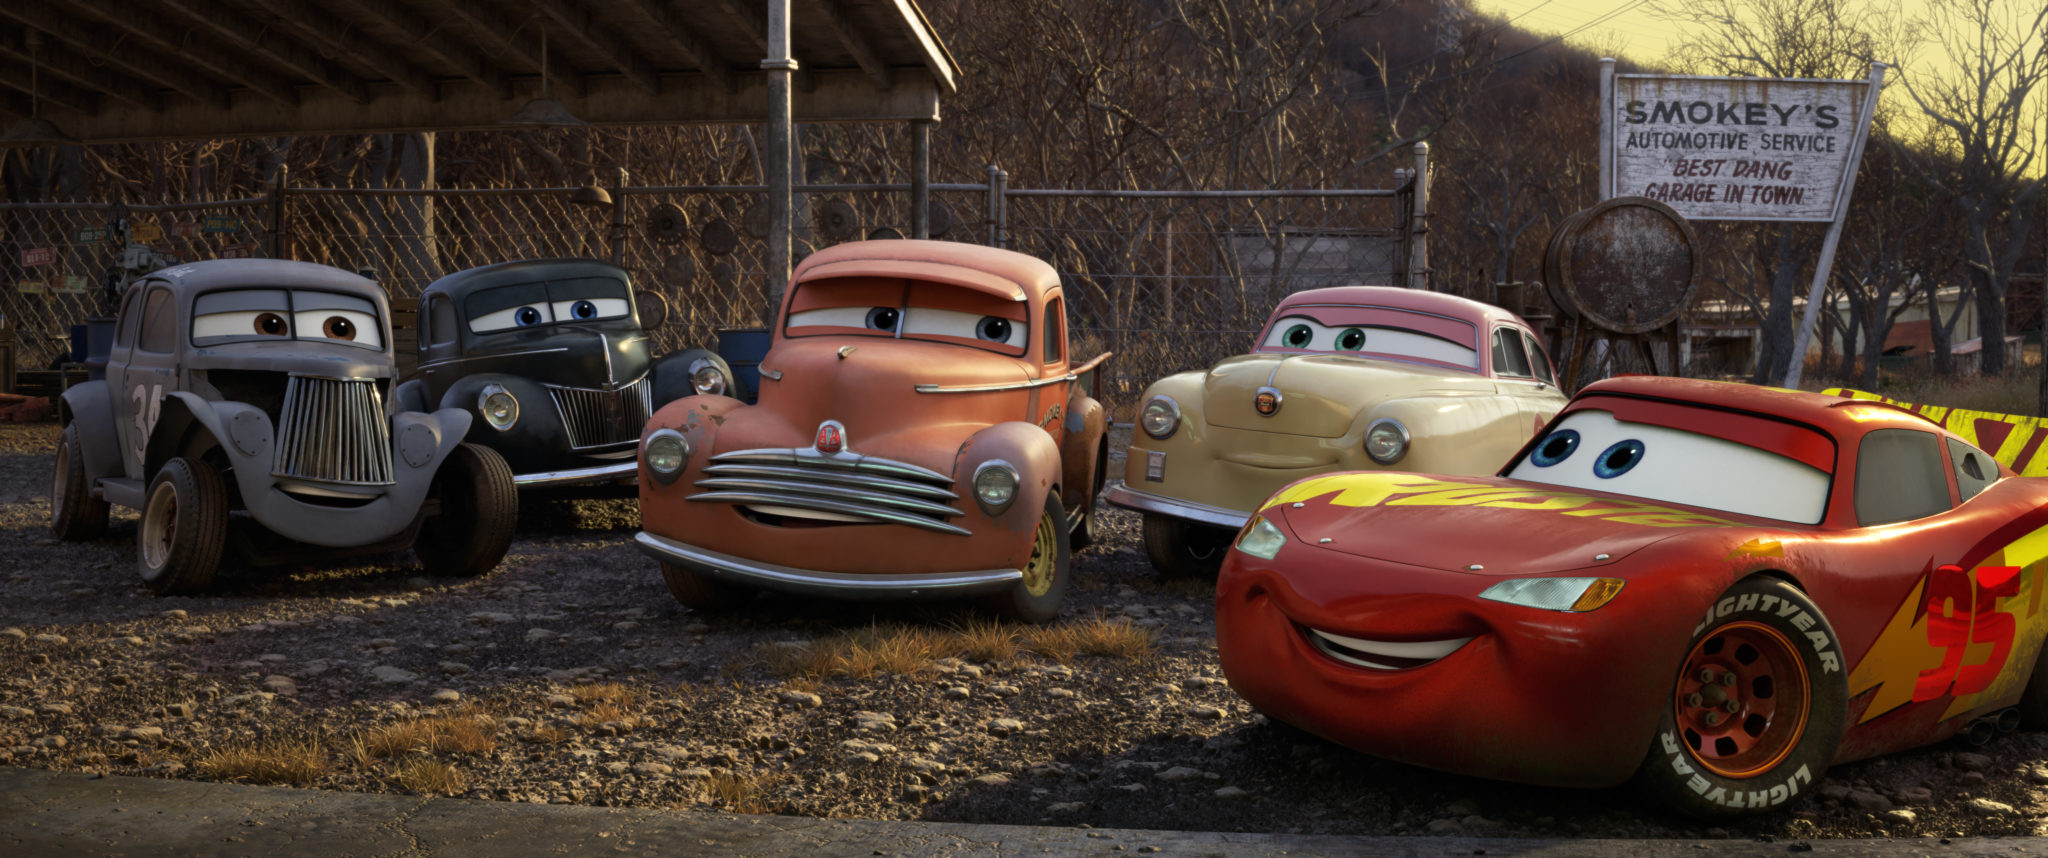 Cars 3 is an introduction to next generation of Pixar Animation while maintaining deep roots in the past